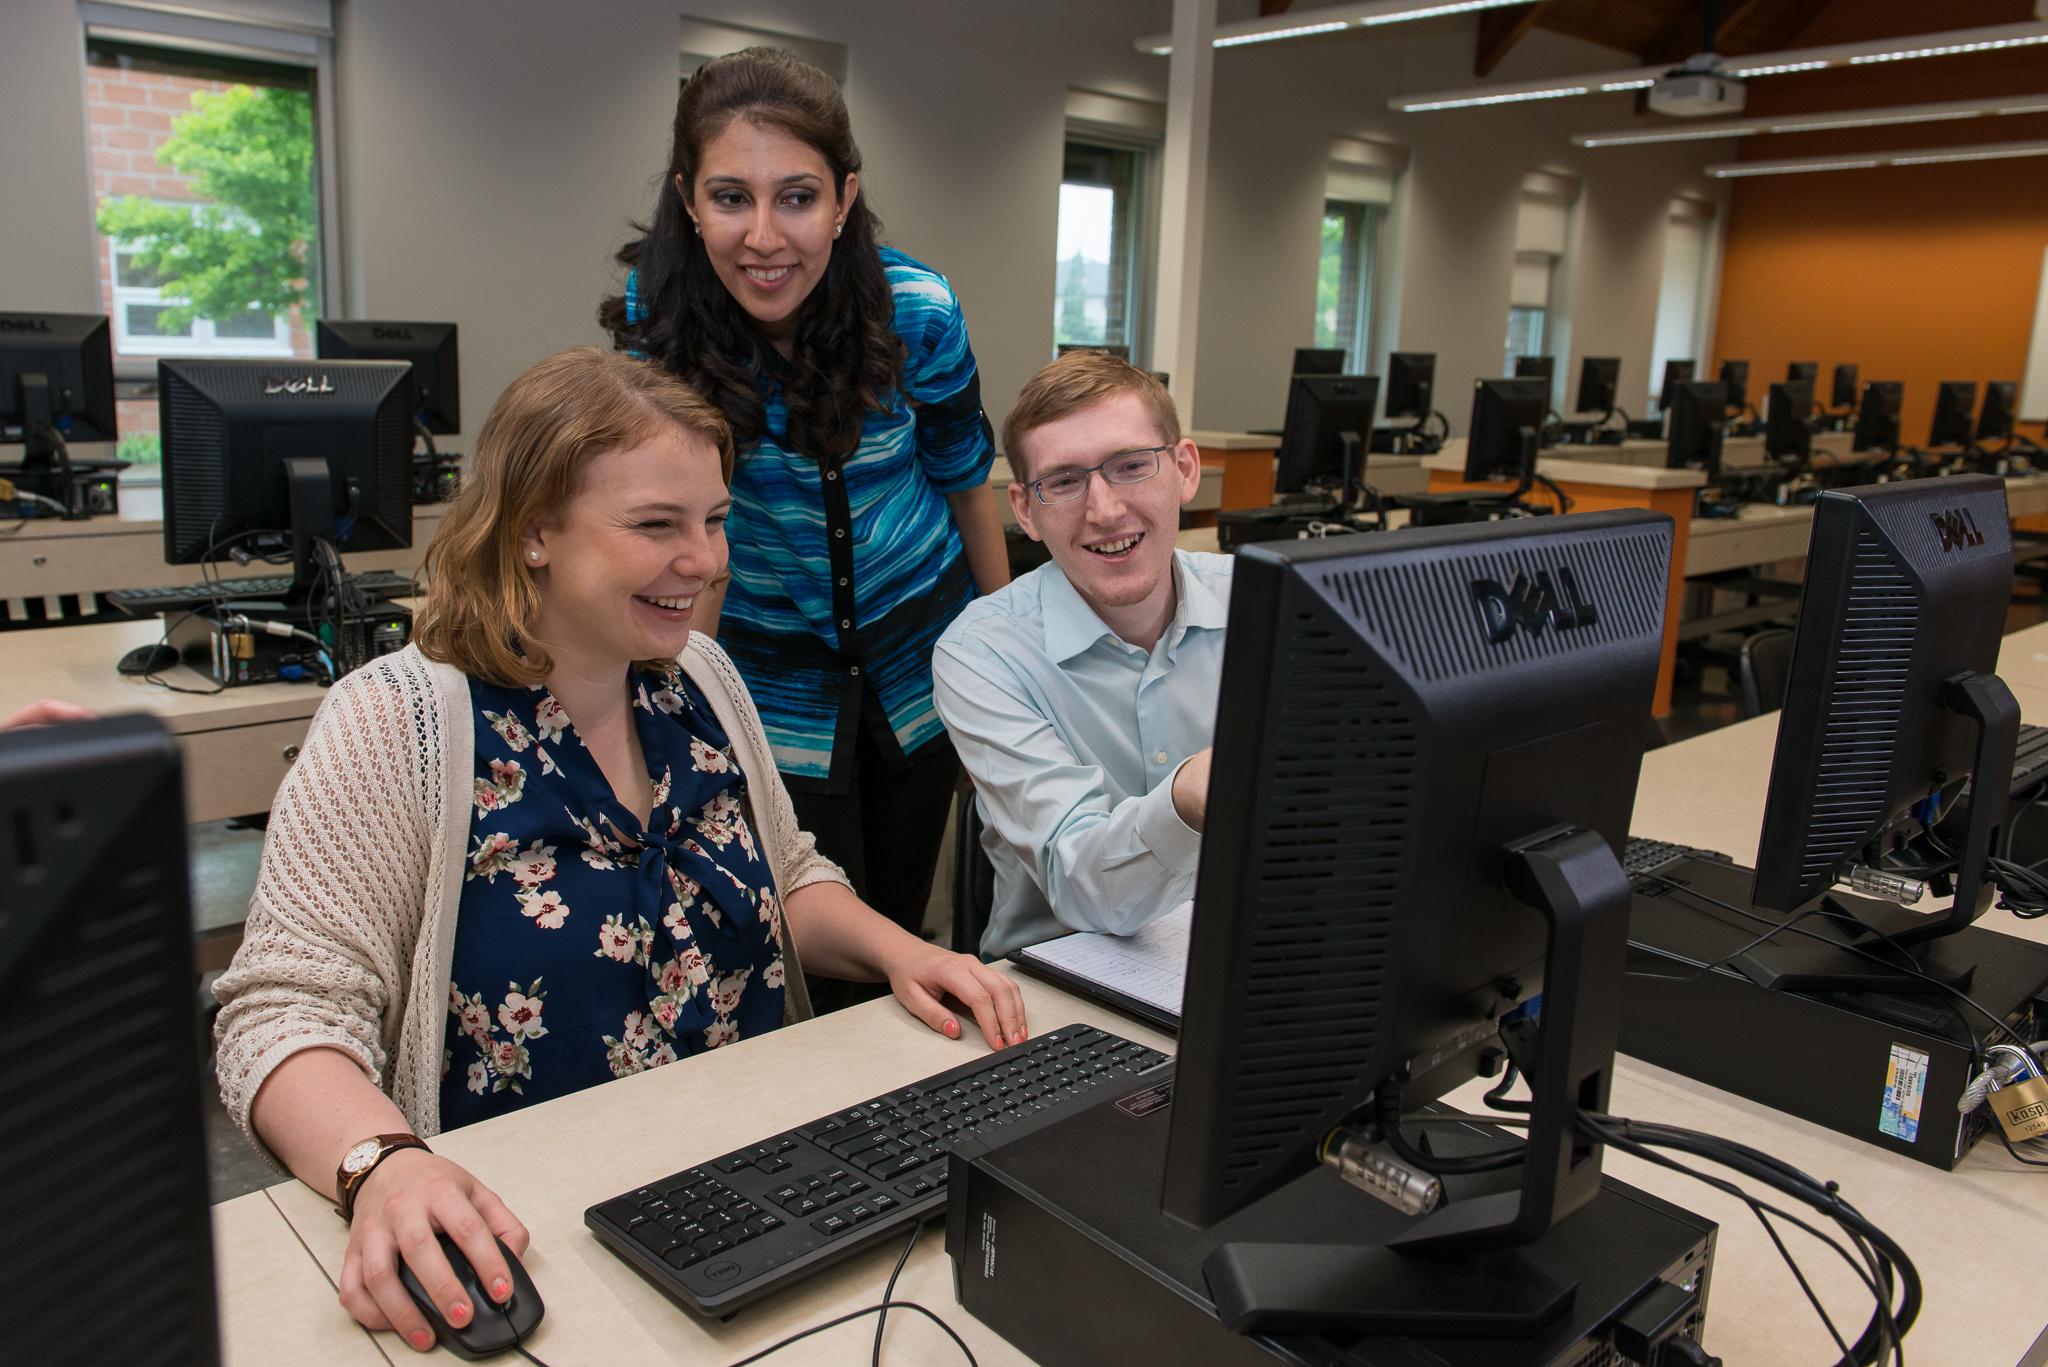 Two students facing a computer, smiling, with teacher leaning in from behind